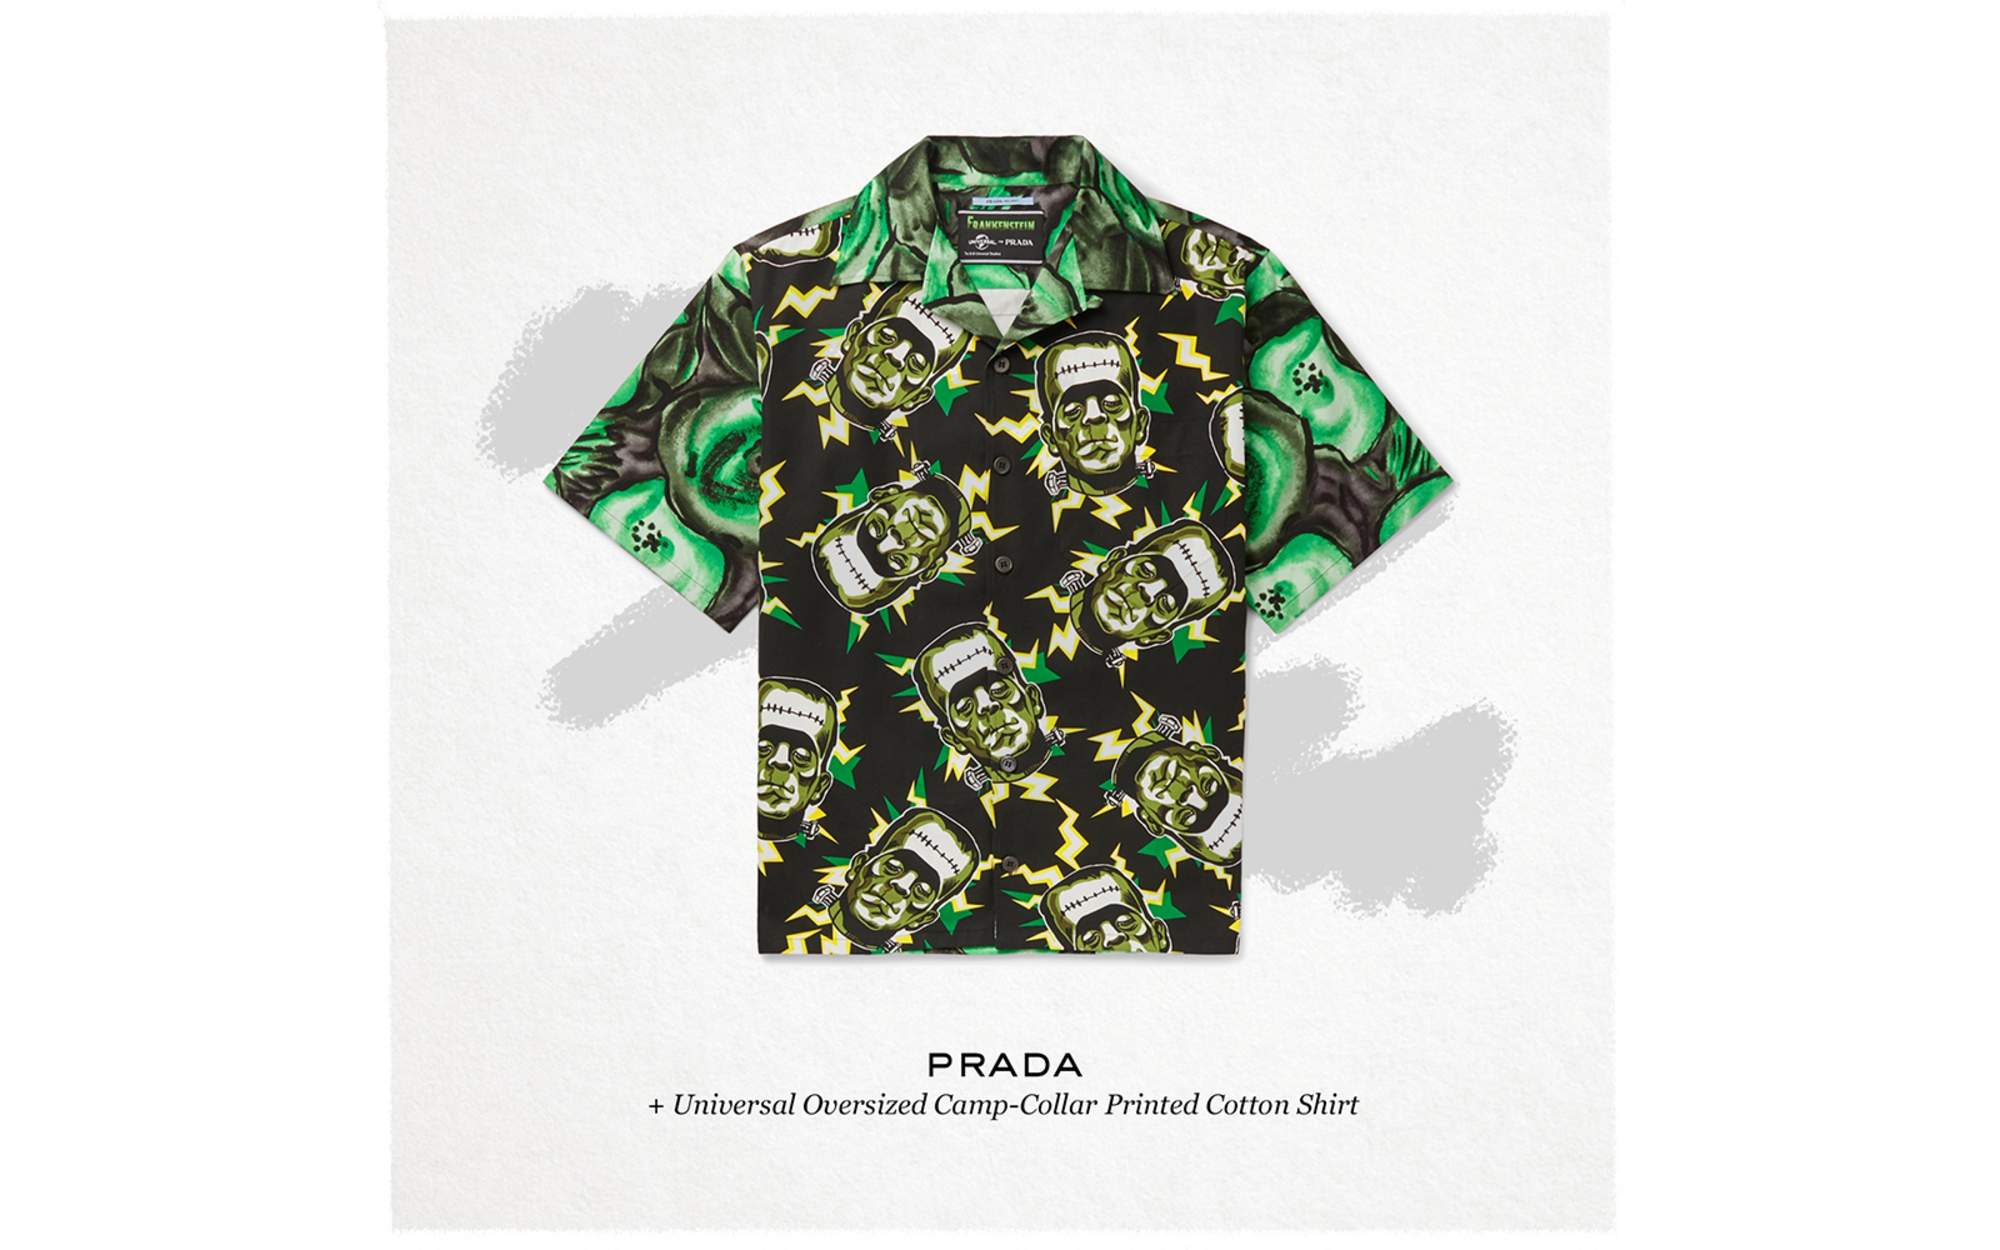 GO BIG OR GO HOME: PRINTED SHIRTS FOR SUMMER